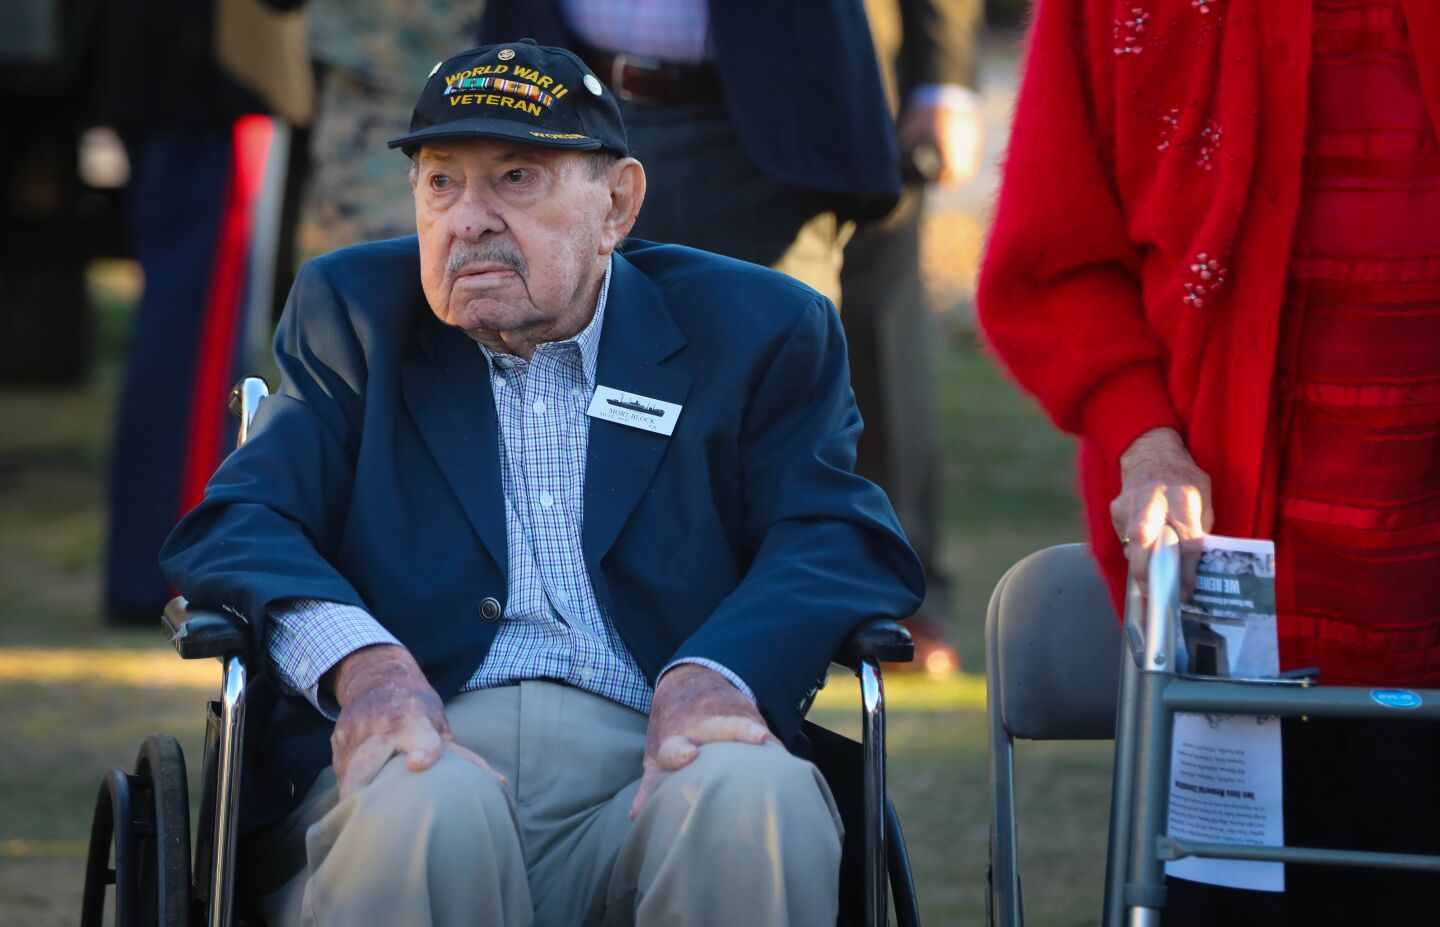 World War II Navy veteran of the Battle of Iwo Jima, Mort Block, of Carlsbad, listens during the commemoration ceremony for the 75th anniversary of the famous battle battle, at Camp Pendleton, February 15. This is the last time the Iwo Jima Commemorative Committee is planning to hold a formal West Coast gathering of veterans of the battle.